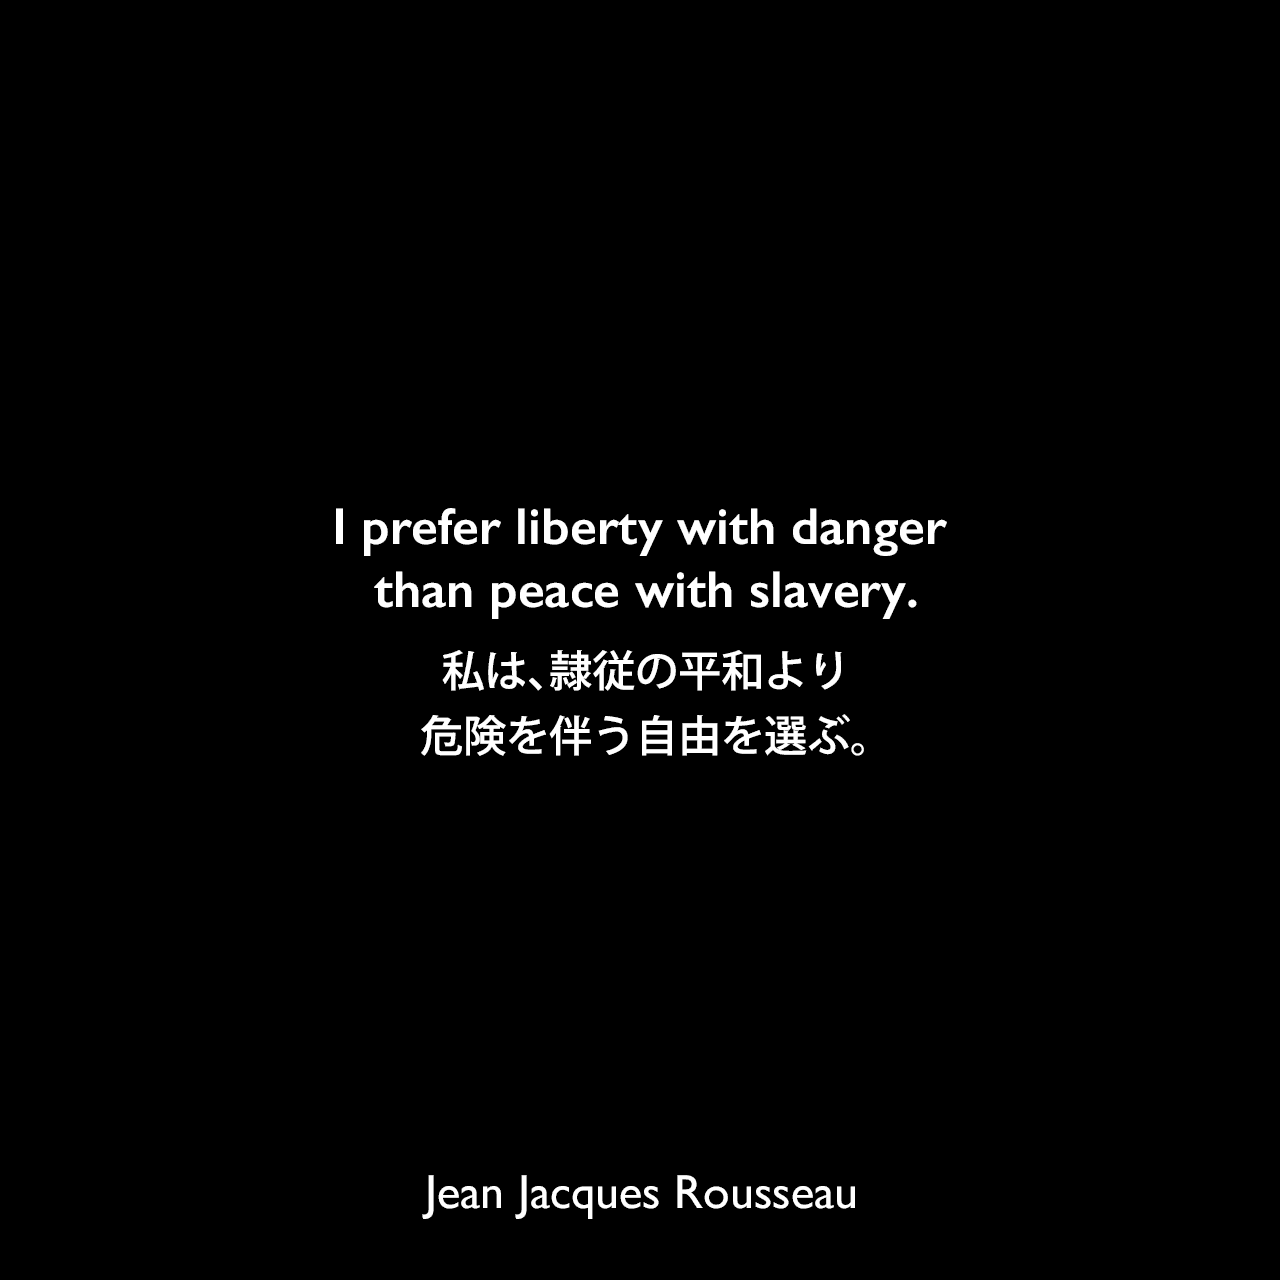 I prefer liberty with danger than peace with slavery.私は、隷従の平和より危険を伴う自由を選ぶ。Jean Jacques Rousseau